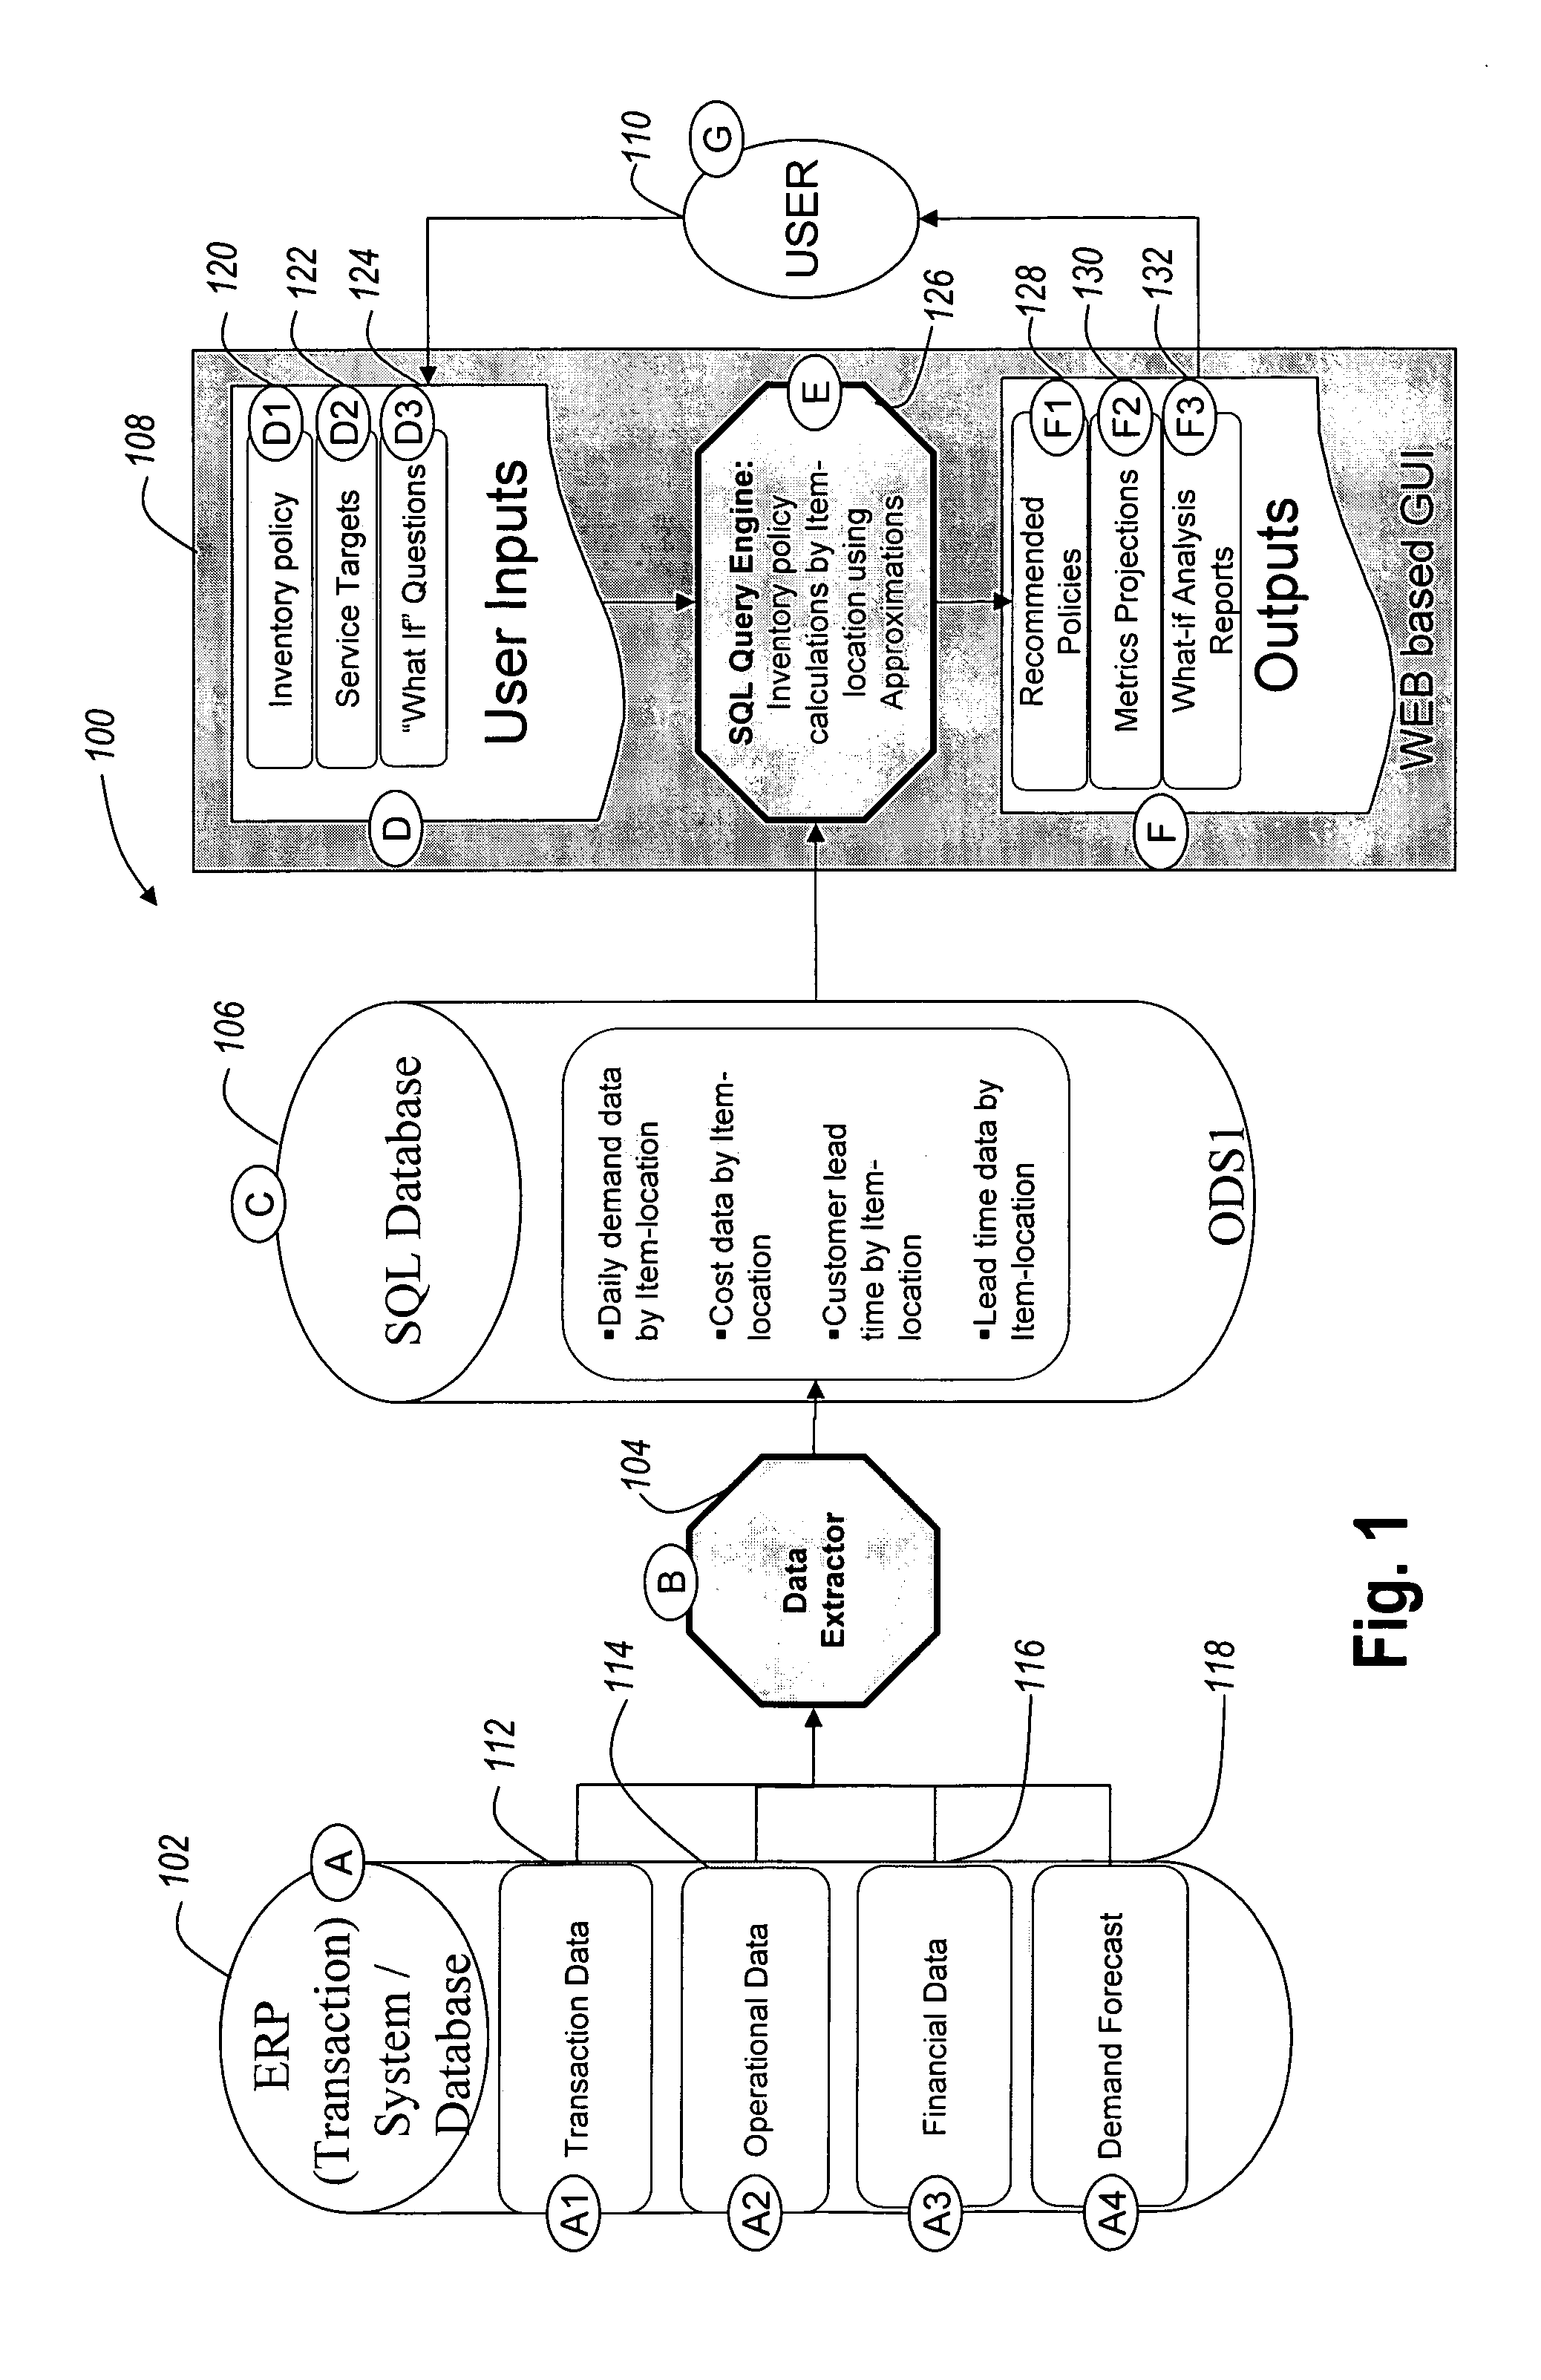 Methods and systems for inventory policy generation using structured query language